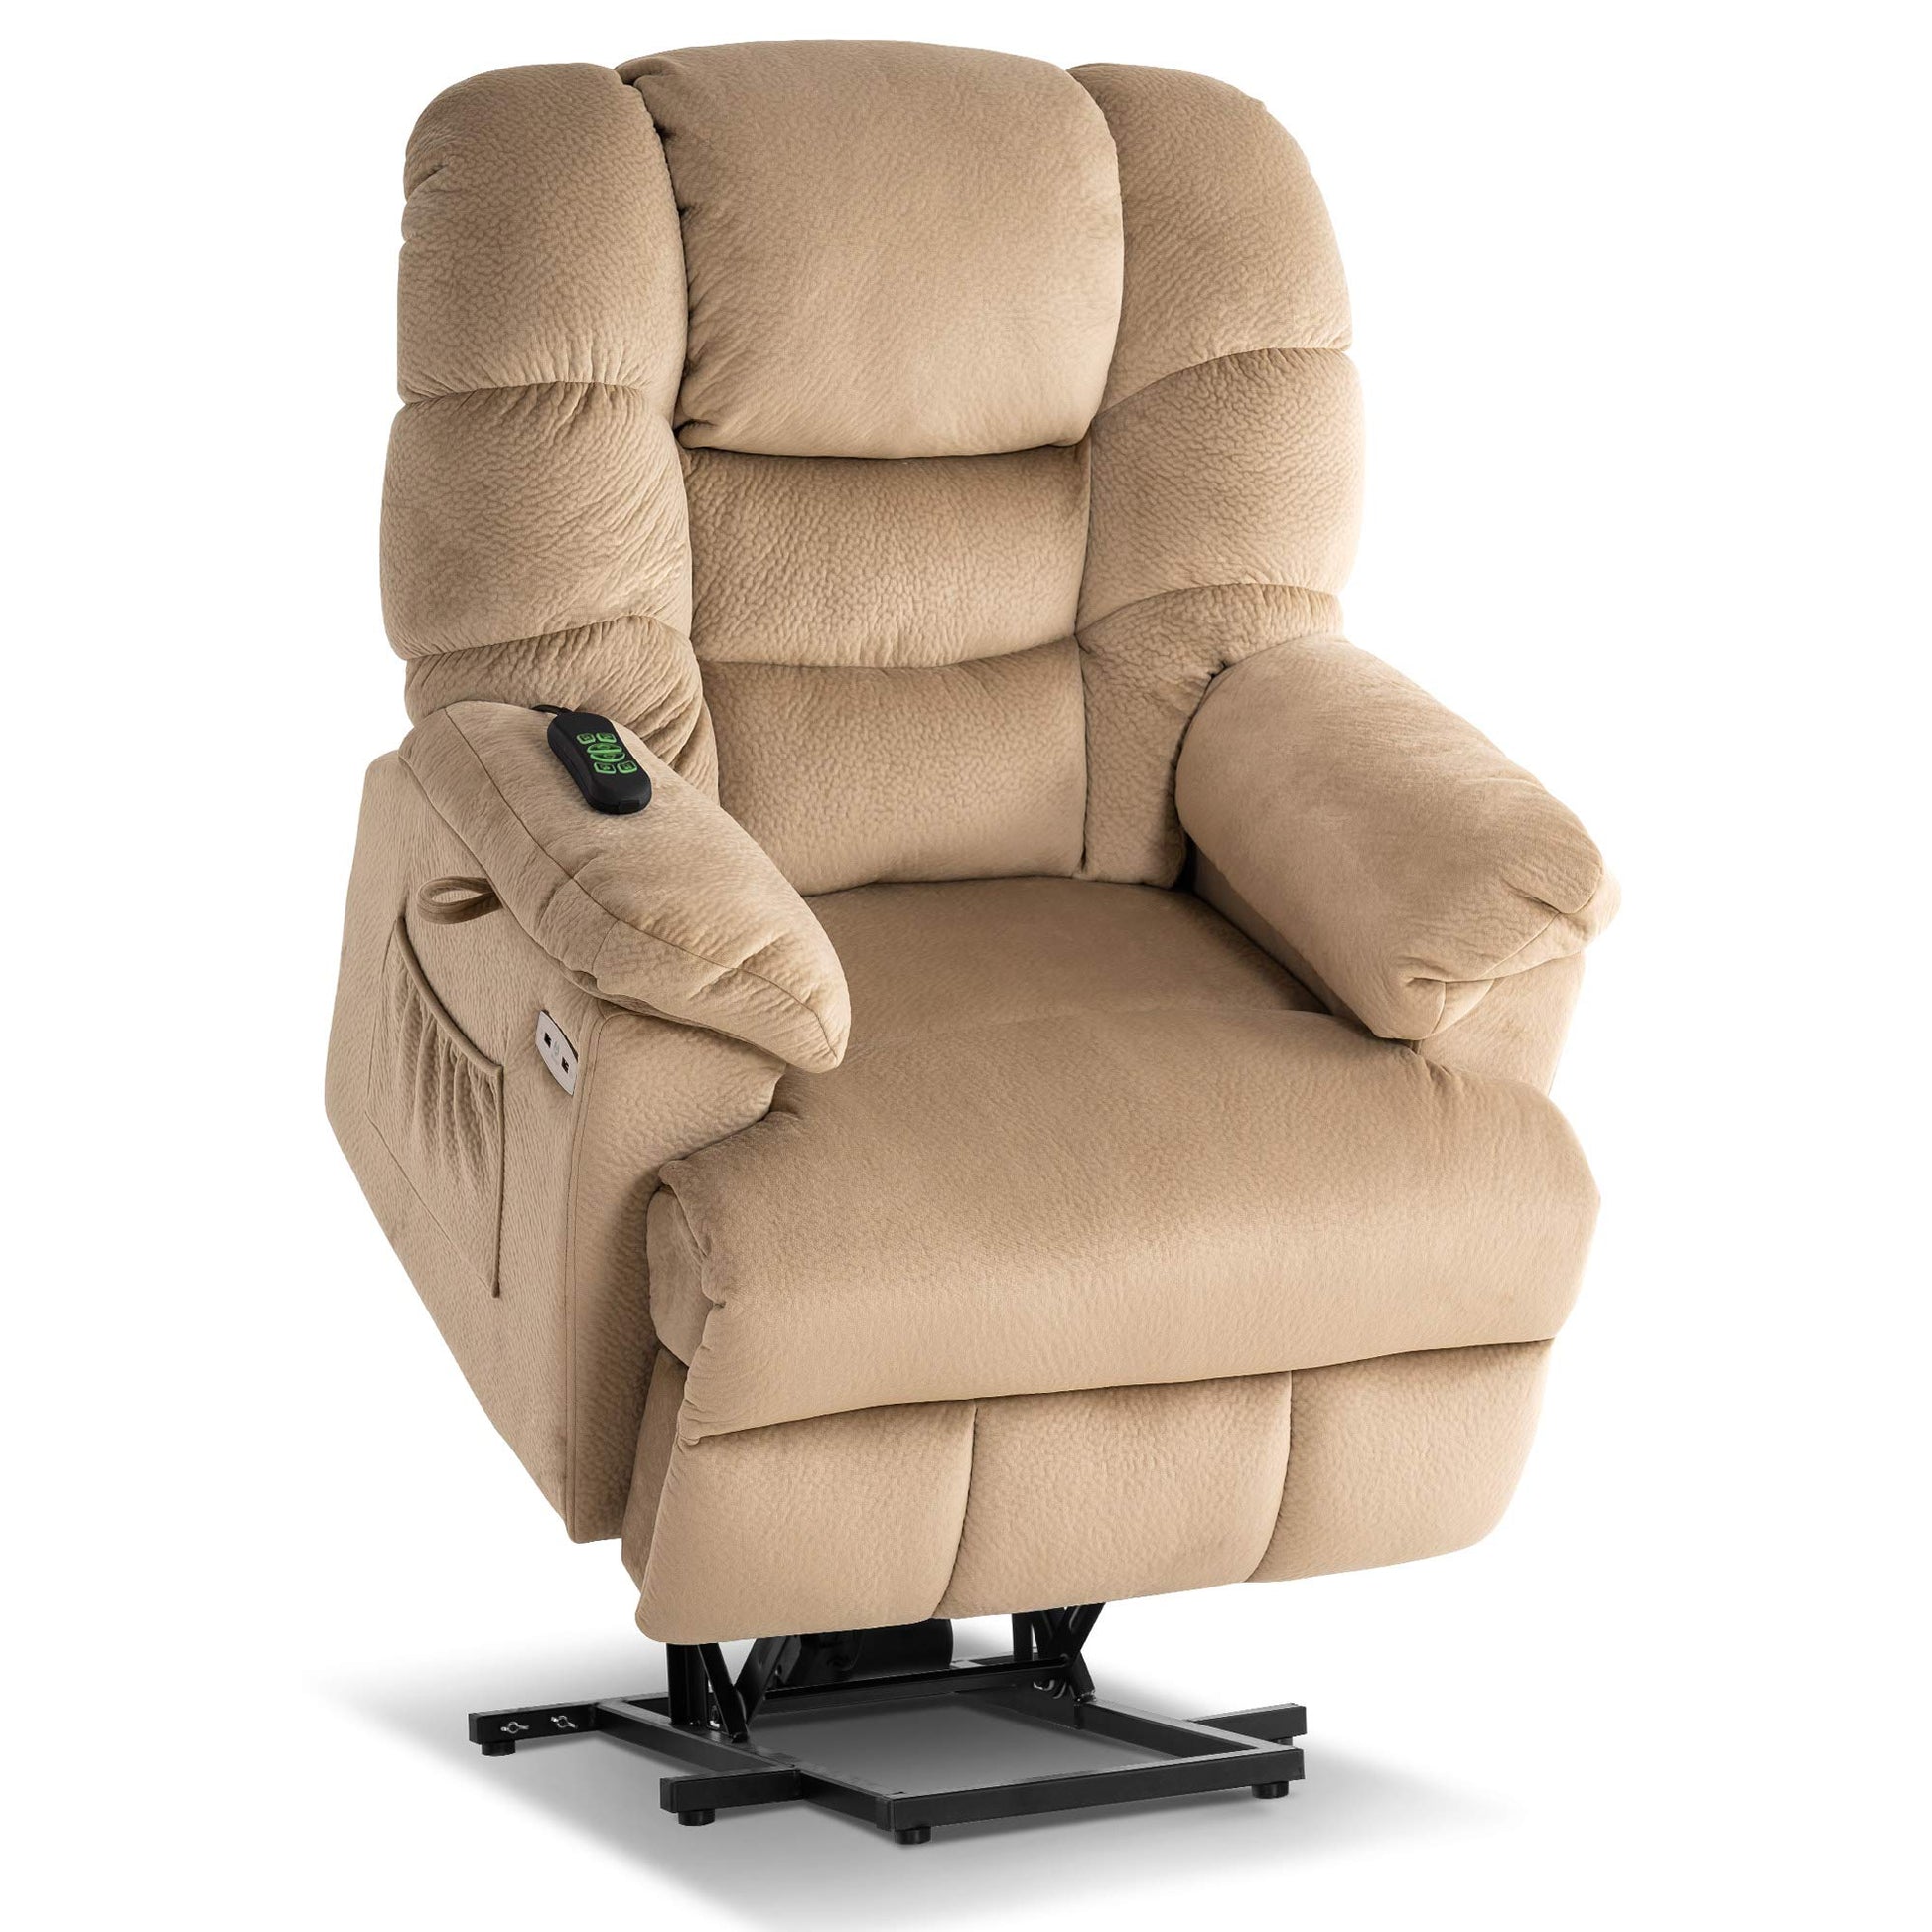 Mcombo Electric Power Lift Recliner Chair with Extended Footrest for Elderly People, 3 Positions, Hand Remote Control, Lumbar Pillow, 2 Cup Holders